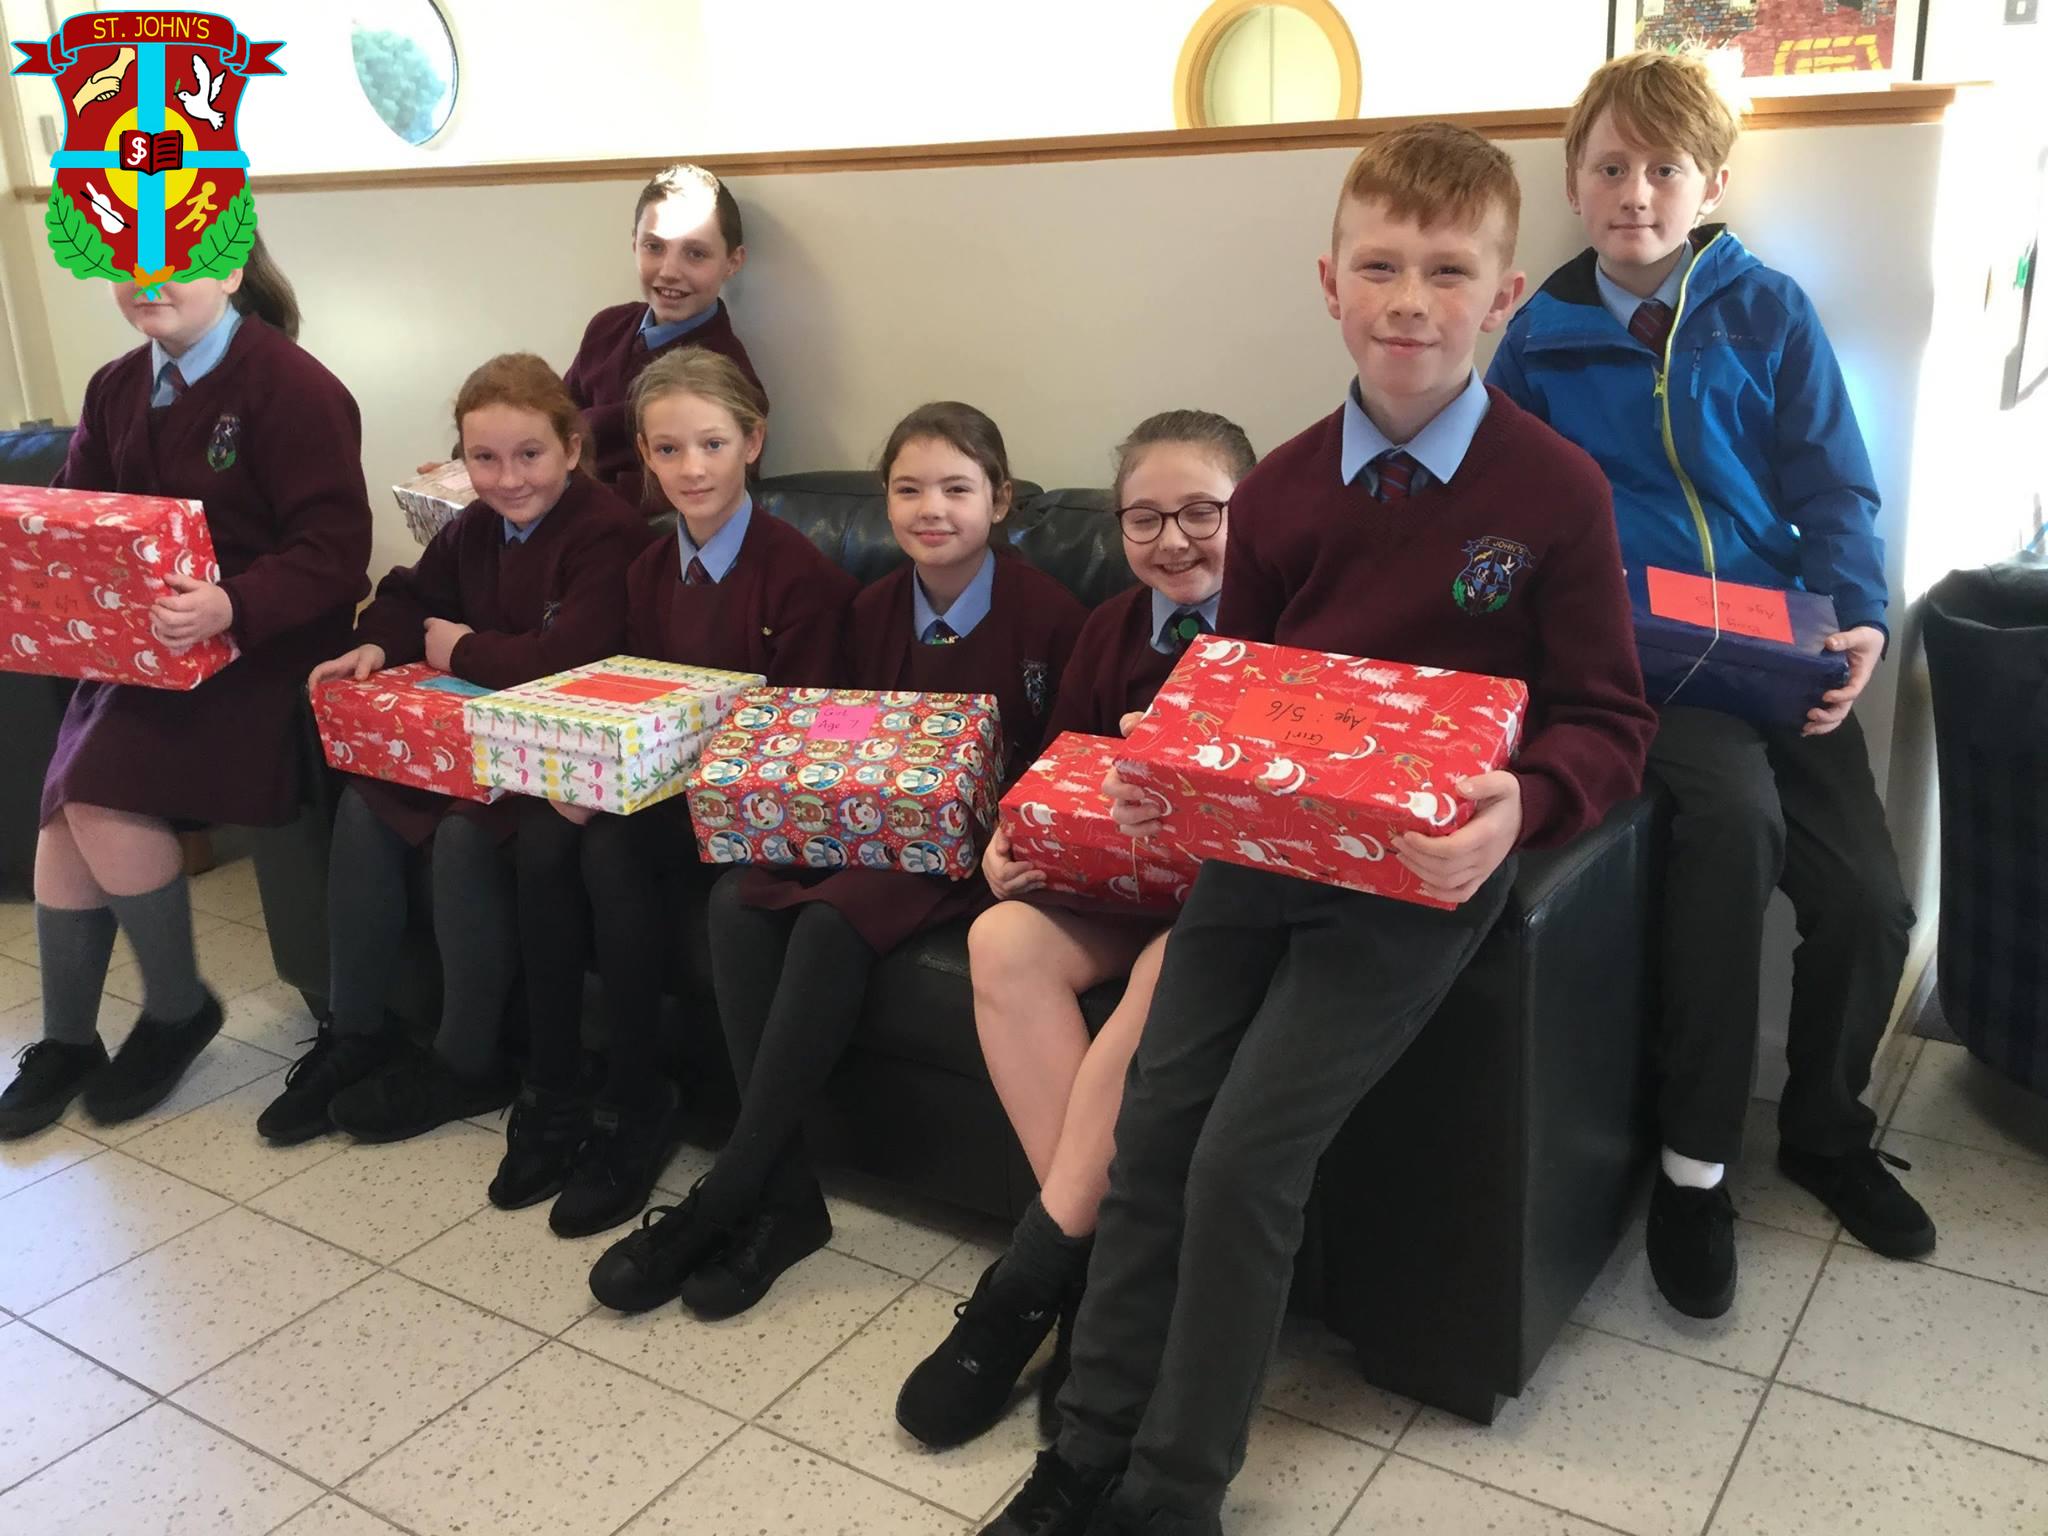 Our shared council, all packed up and ready to take the shoe boxes over to Lisnagelvin Primary School.